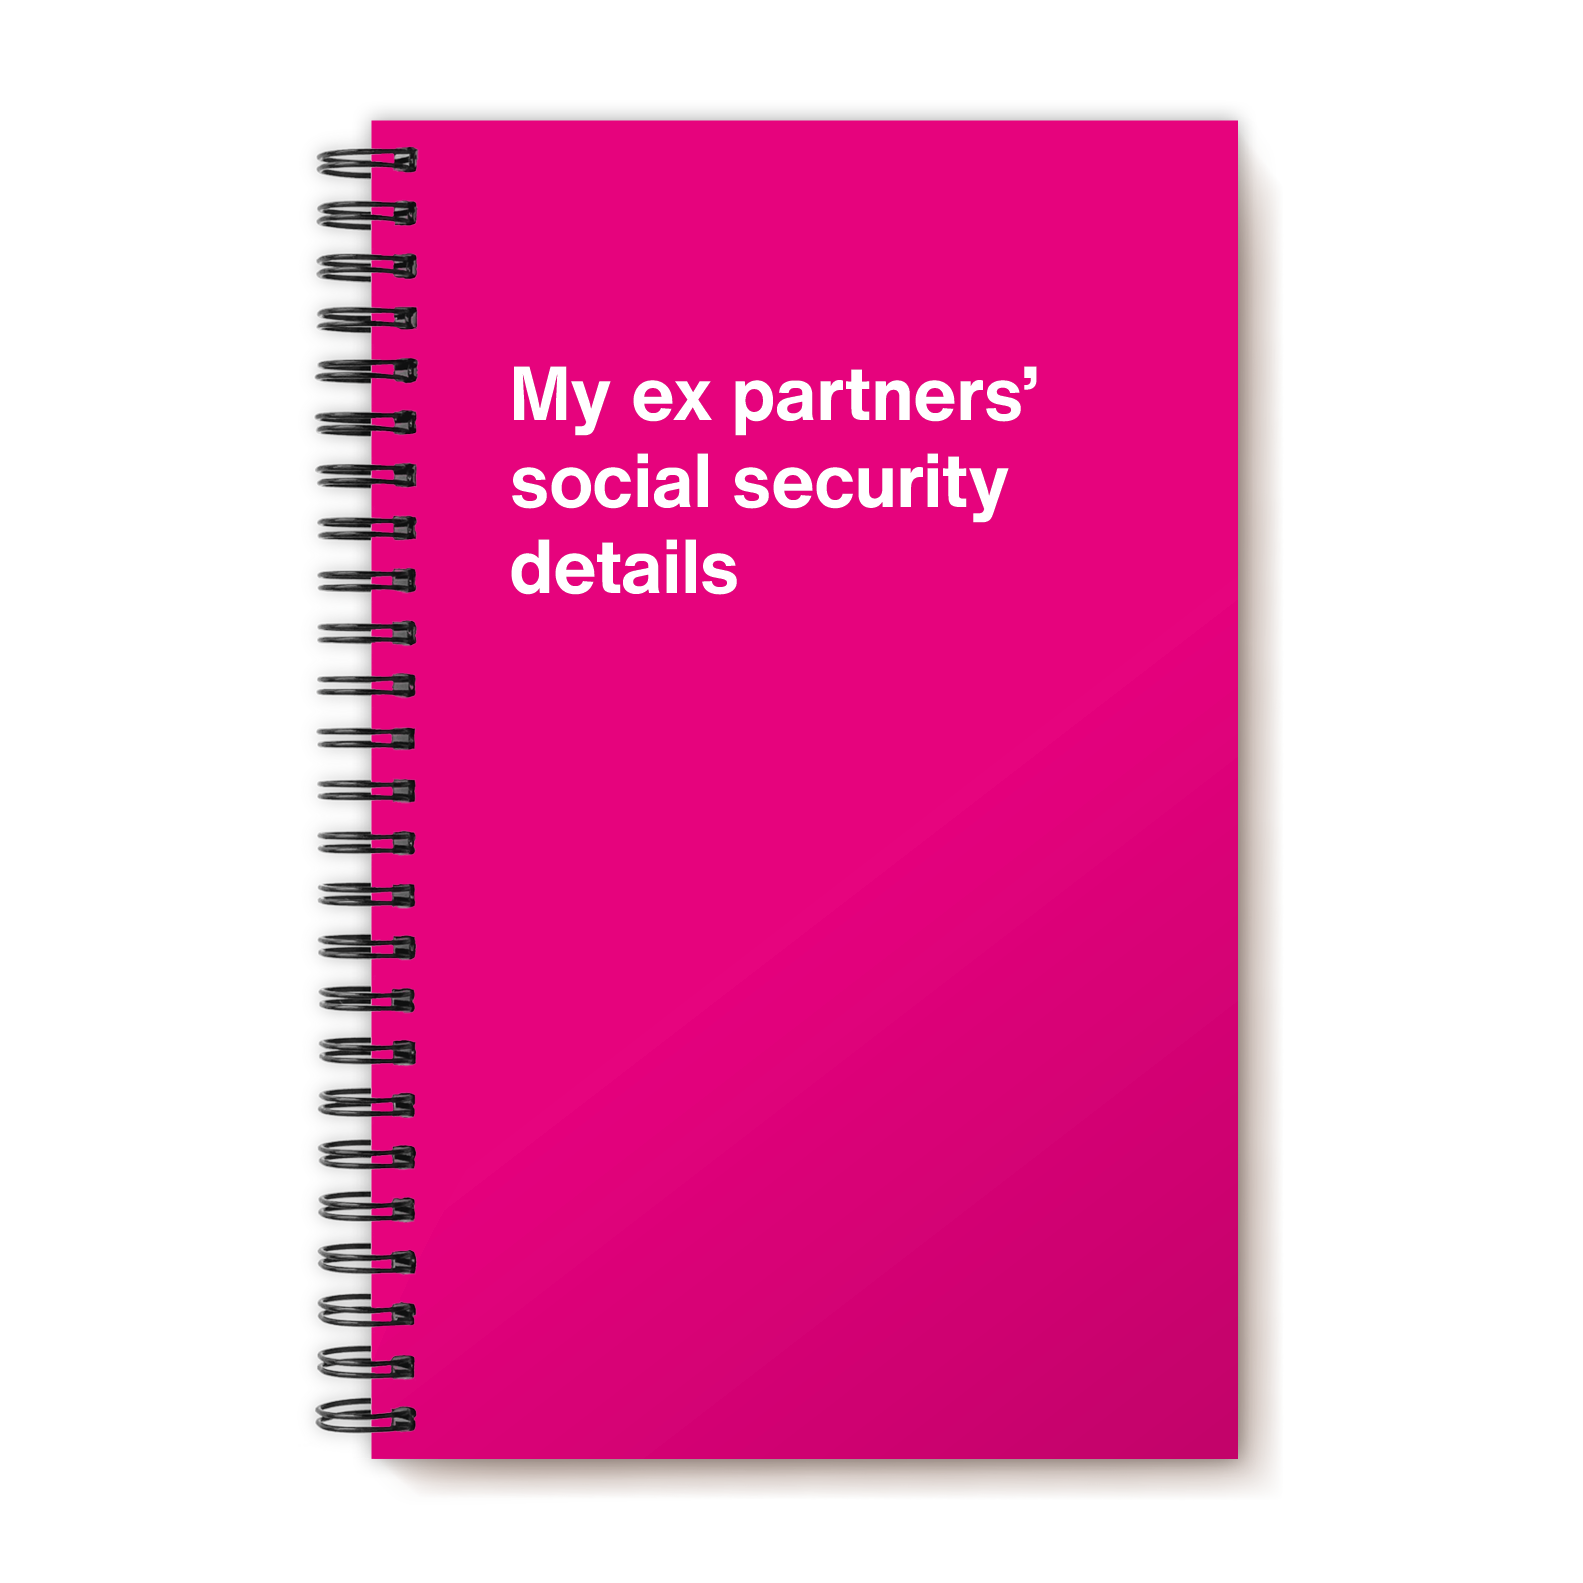 My ex partners' social security details | WTF Notebooks